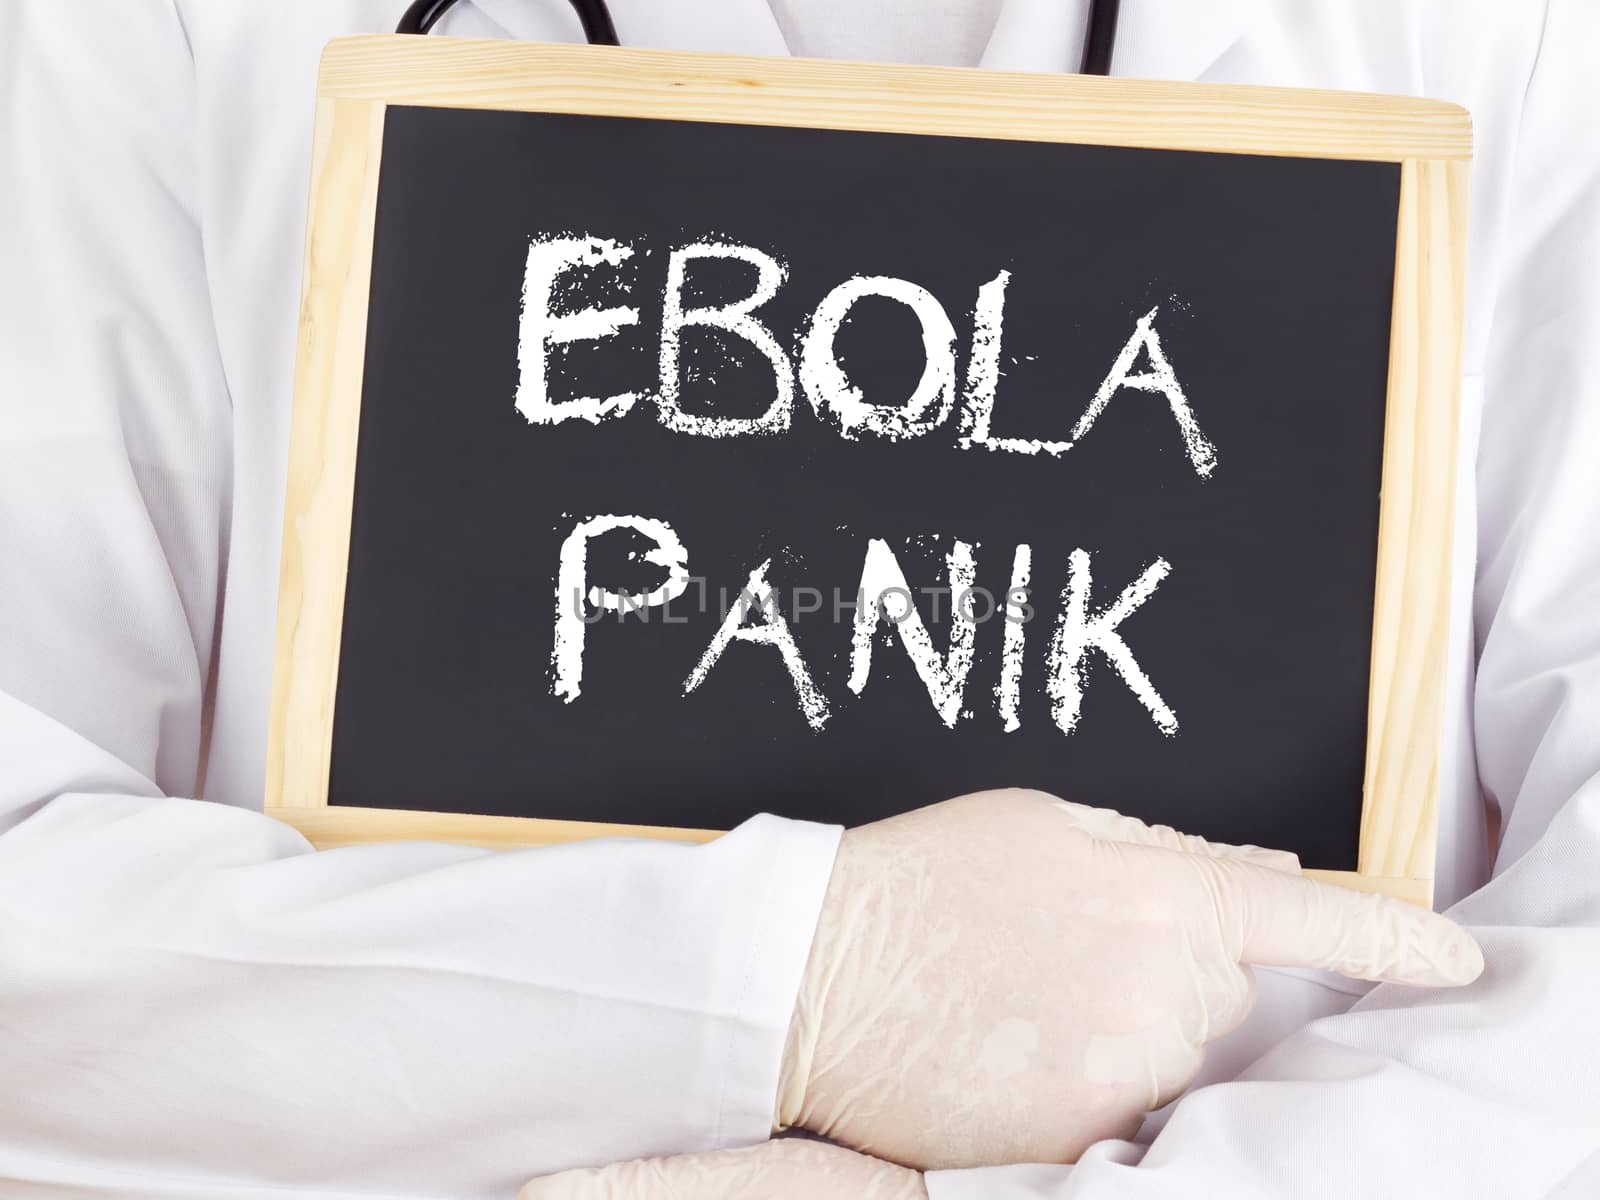 Doctor shows information: Ebola panic in german language by gwolters